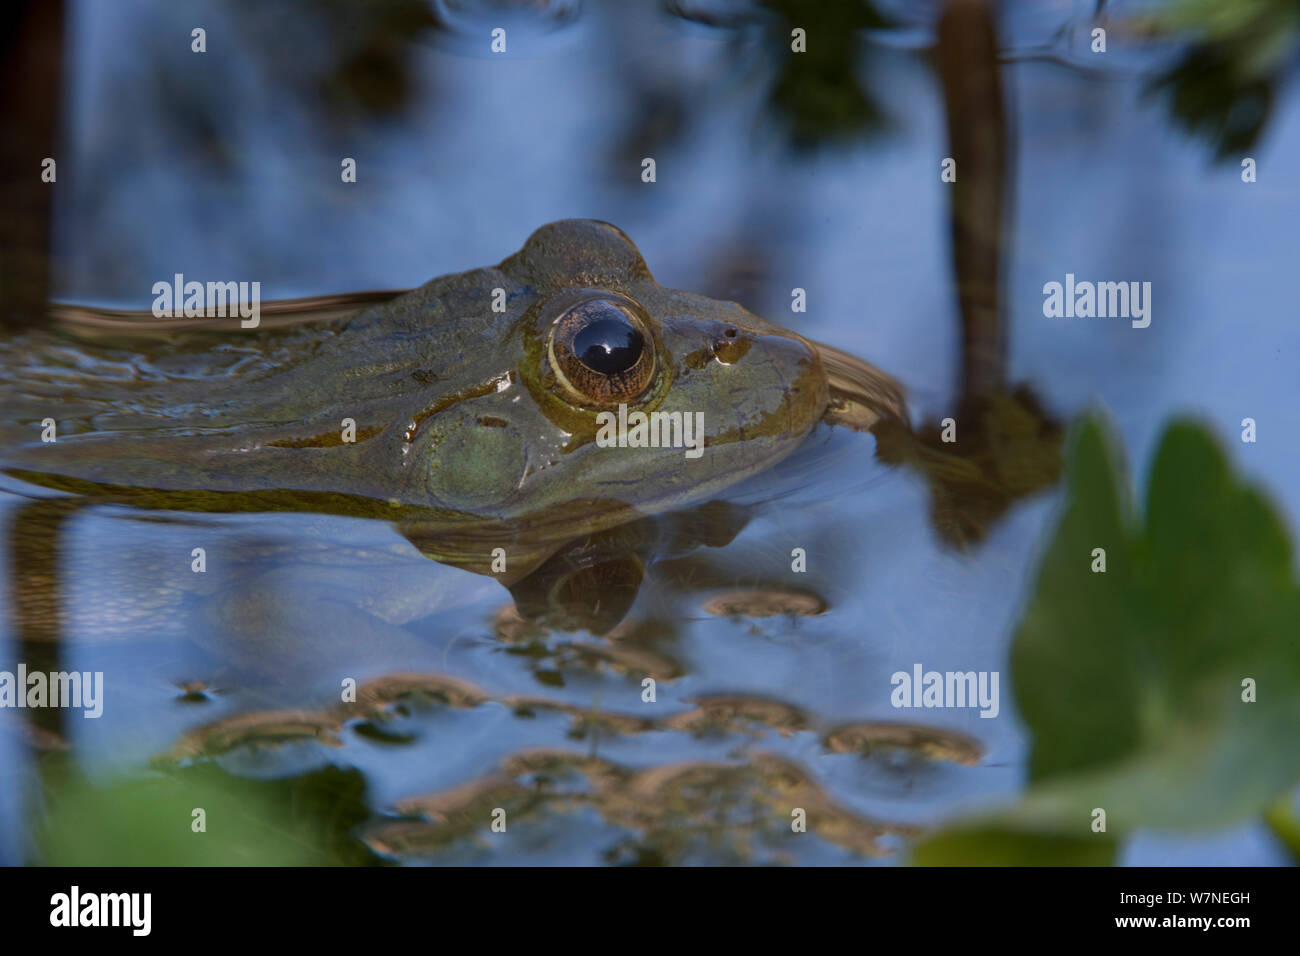 Chiricahua Leopard Frog (Rana chiricahuensis) also known as Ramsey Canyon Leopard Frog (Rana subaquavocalis) profile in water, IUCN vulnerable, Arizona, USA Stock Photo